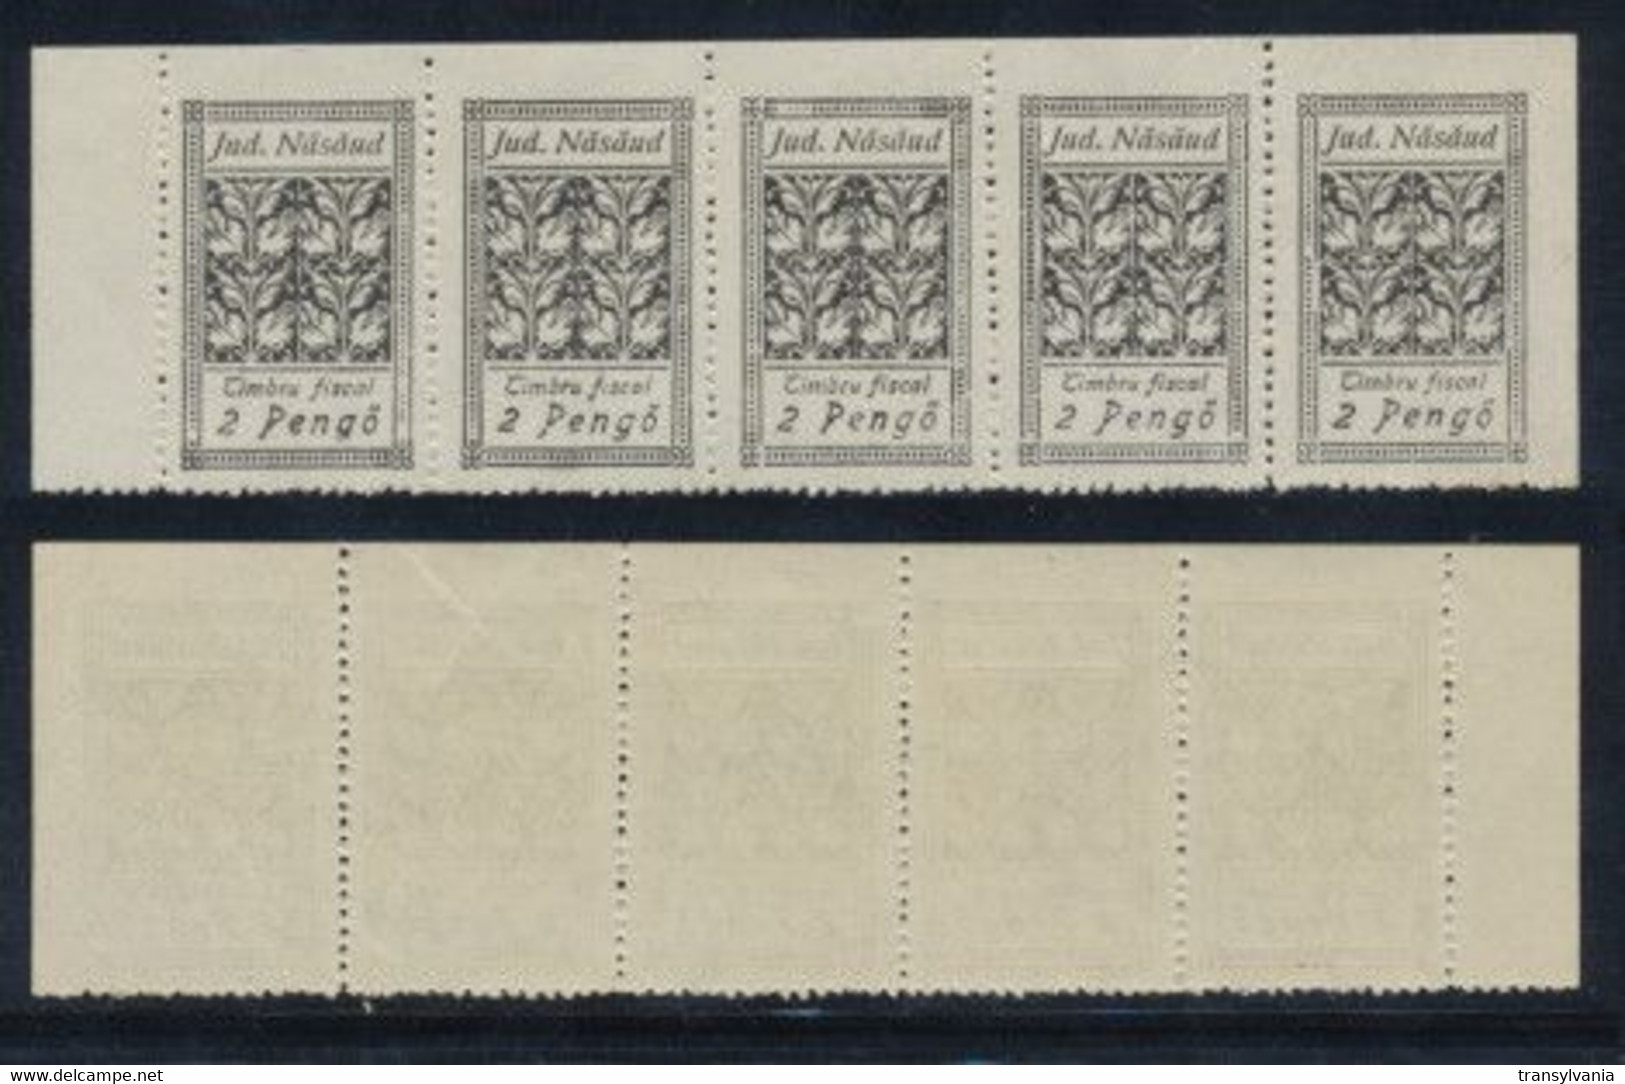 Romania Northern Transylvania 1945 Nasaud Local Revenue 2 Pengo MNH Stamps In Horizontal Strip Of 5. RR! - Fiscale Zegels